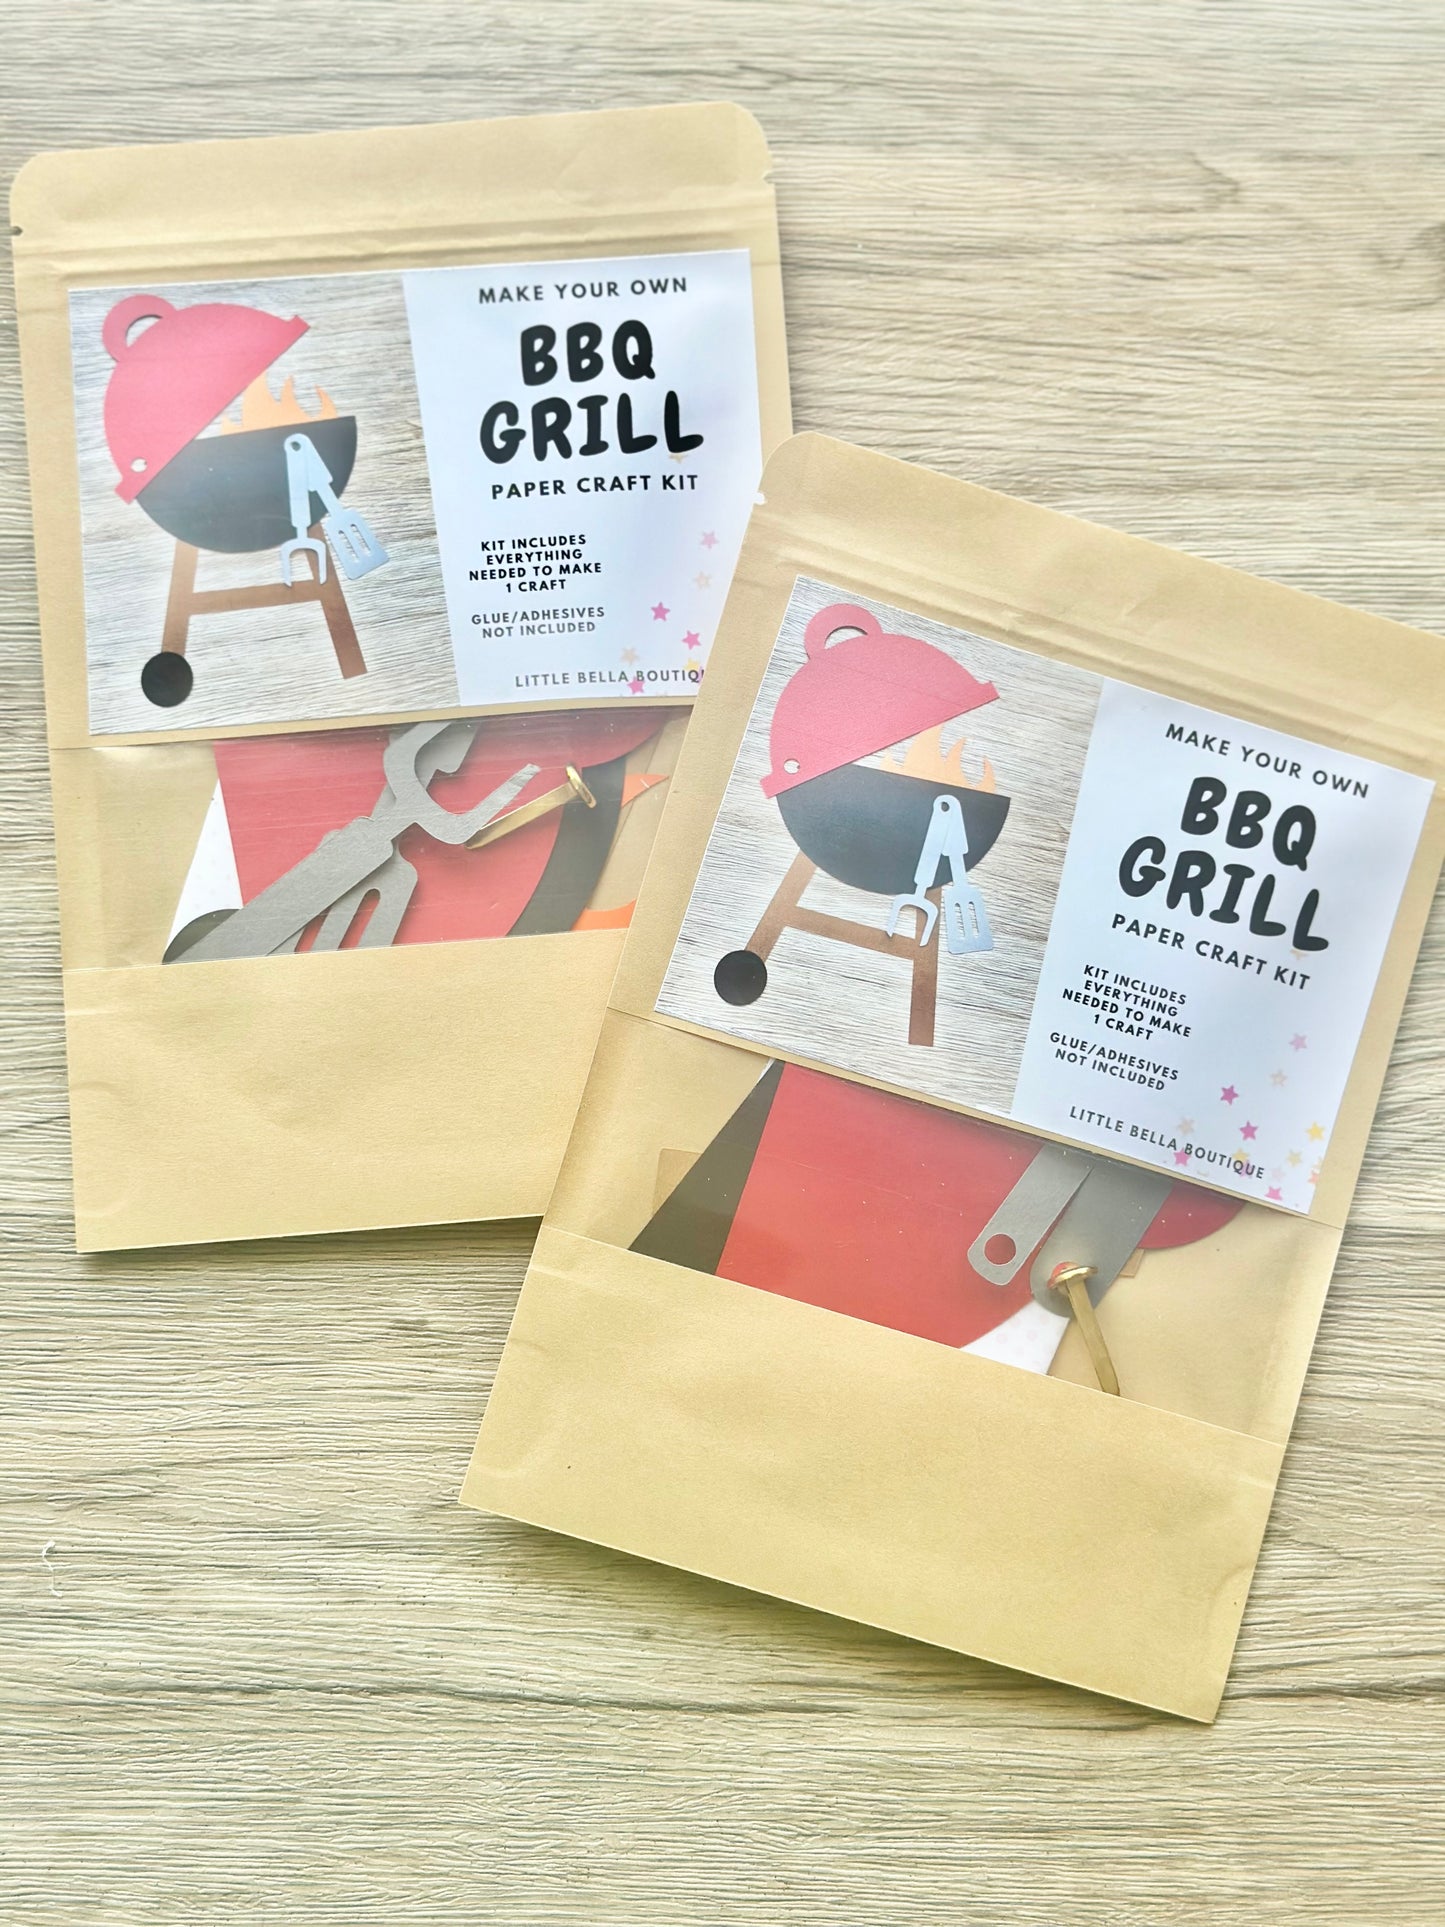 Make Your Own BBQ Grill Paper Craft Kit